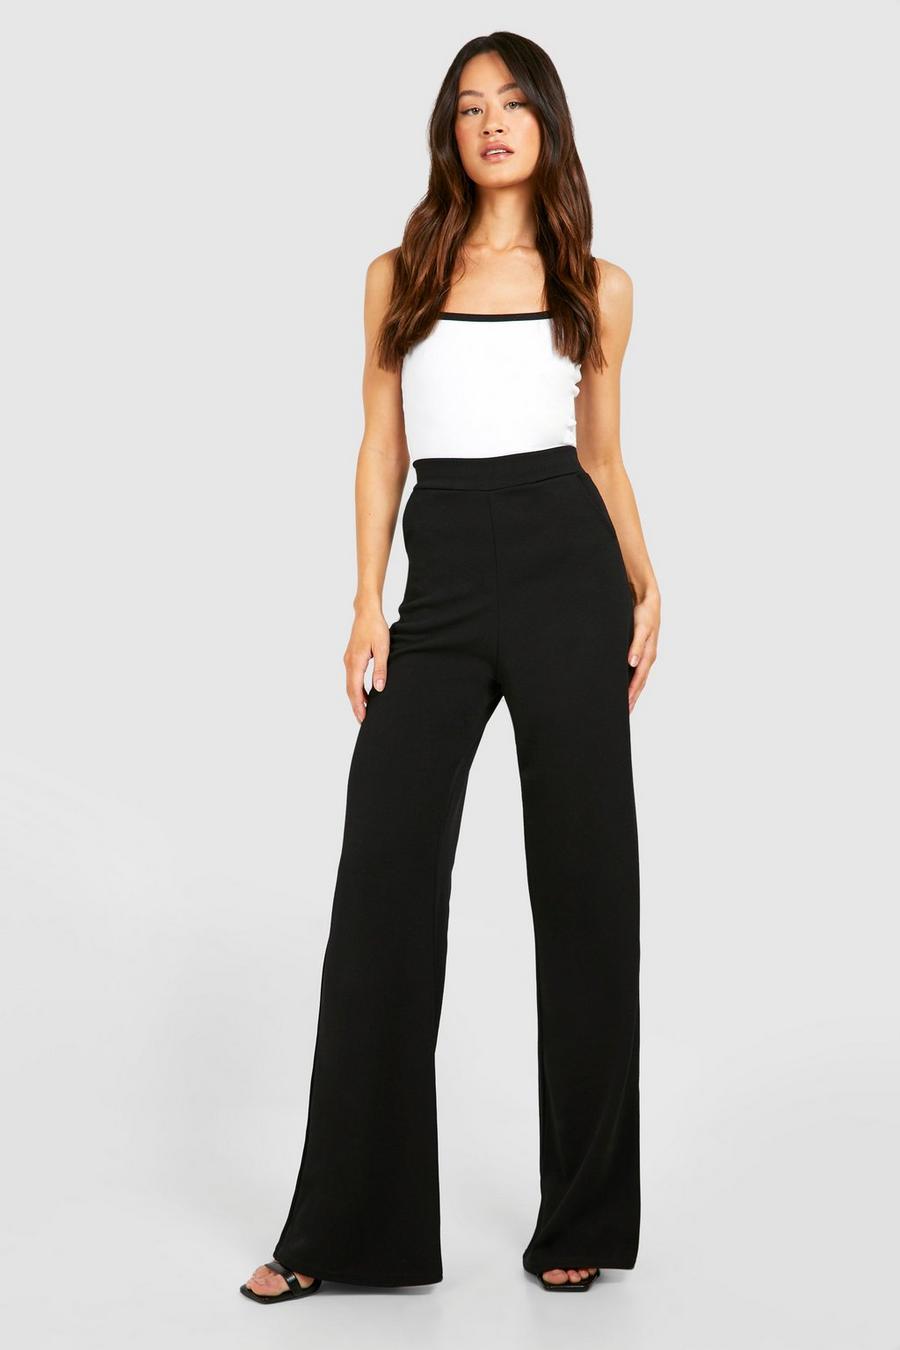 Black Tall High Waisted Trousers